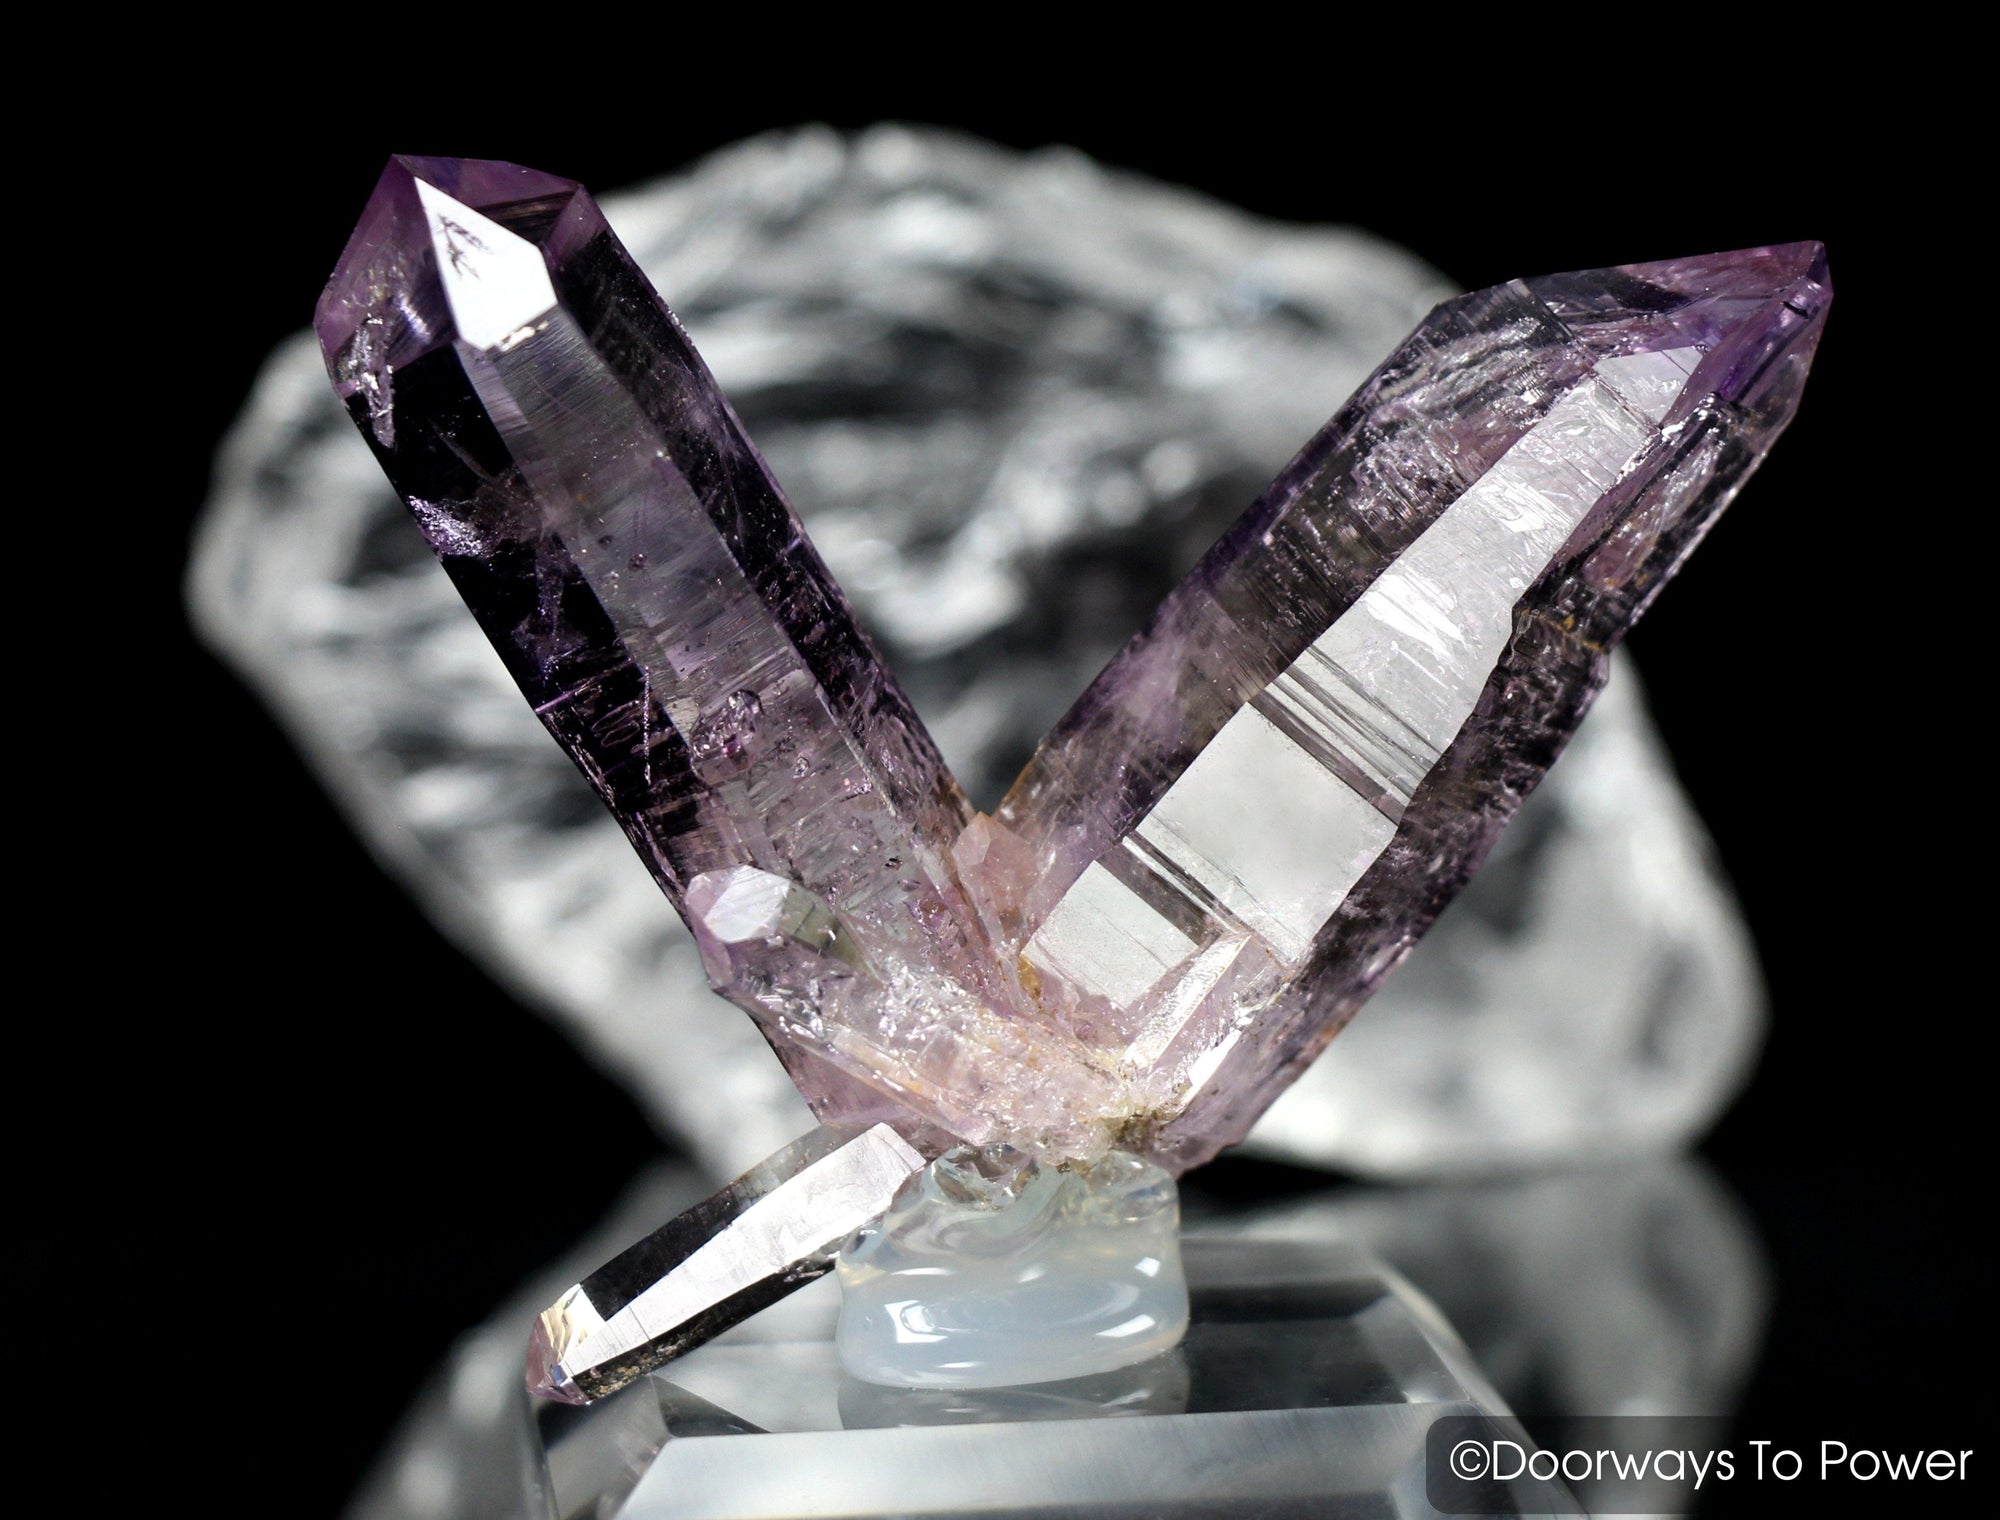 Amethyst Quartz Crystals: protective, healing and uplifting in all ways